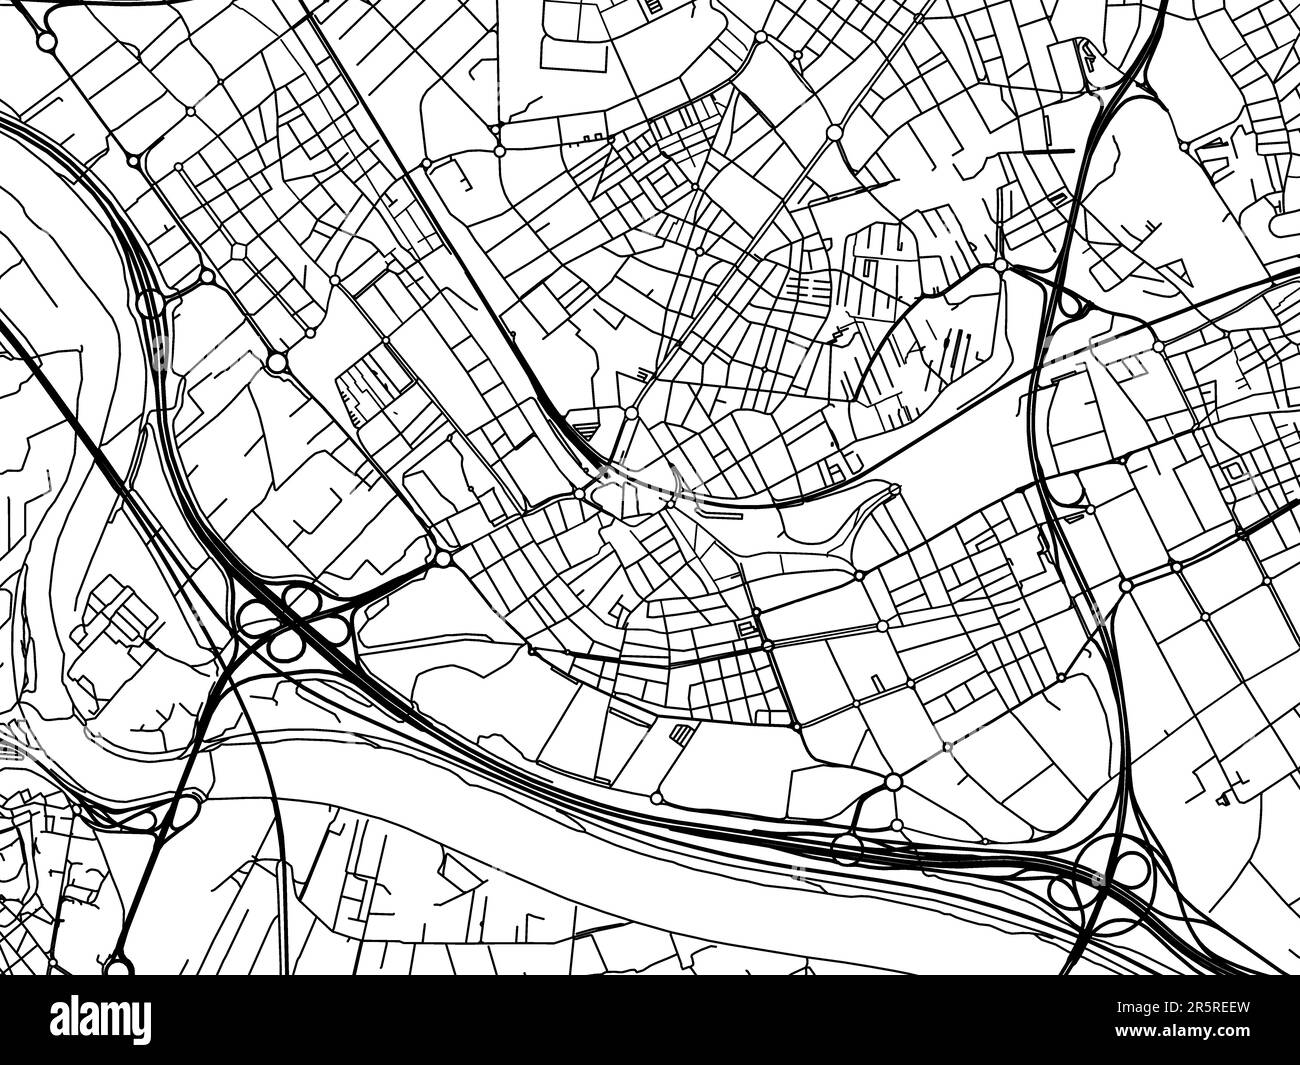 Vector road map of the city of  Cornella de Llobregat in Spain on a white background. Stock Photo